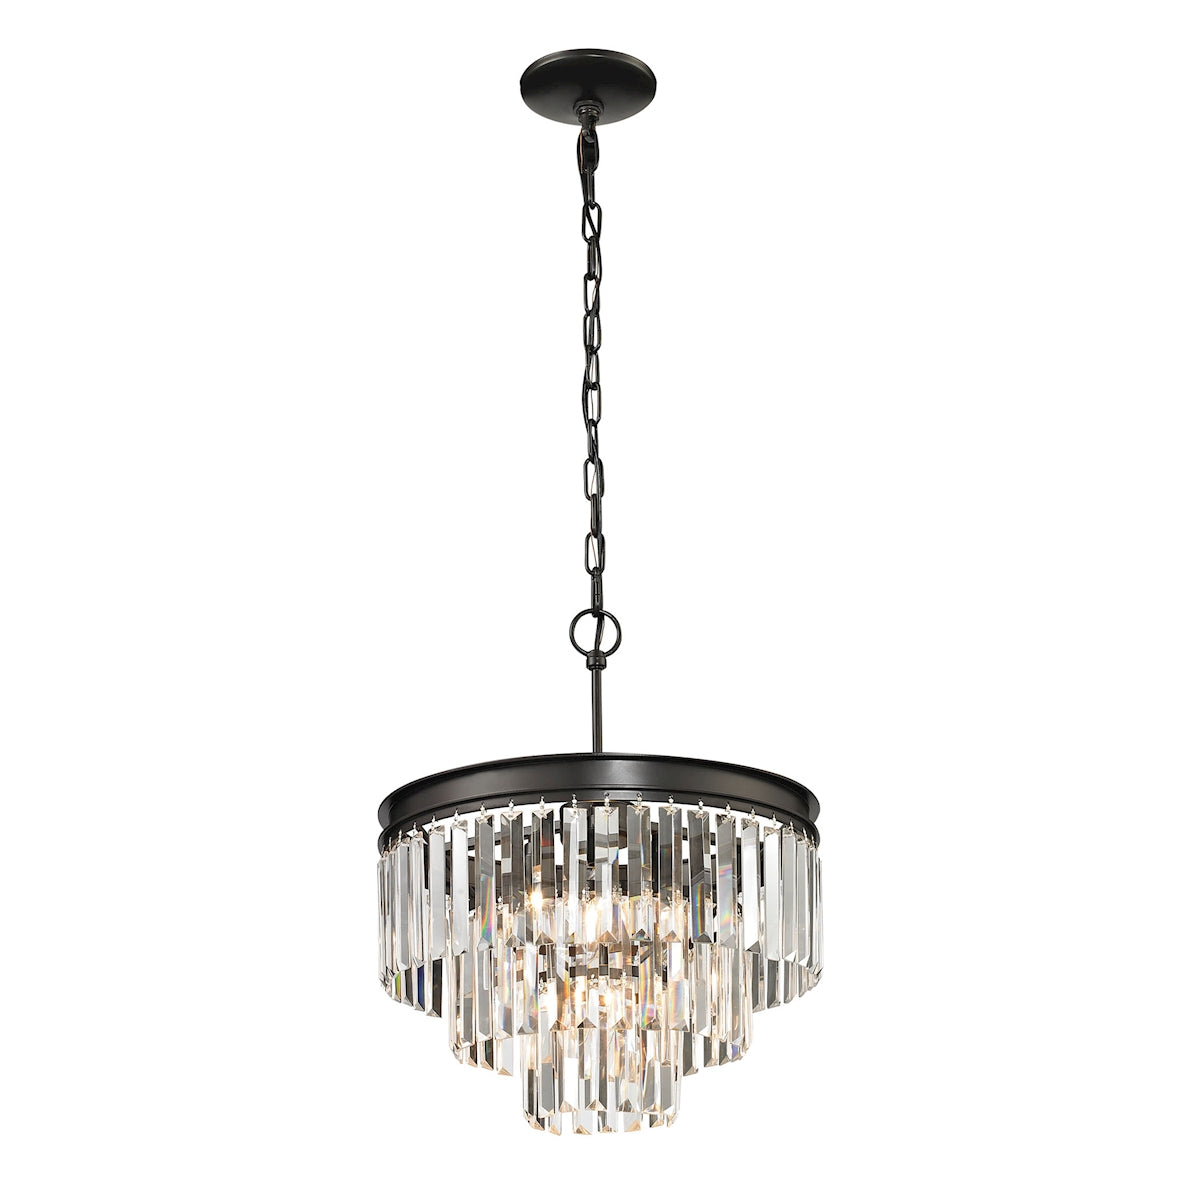 ELK Lighting 14212/3+1 Palacial 3+1-Light Chandelier in Oil Rubbed Bronze with Clear Crystal